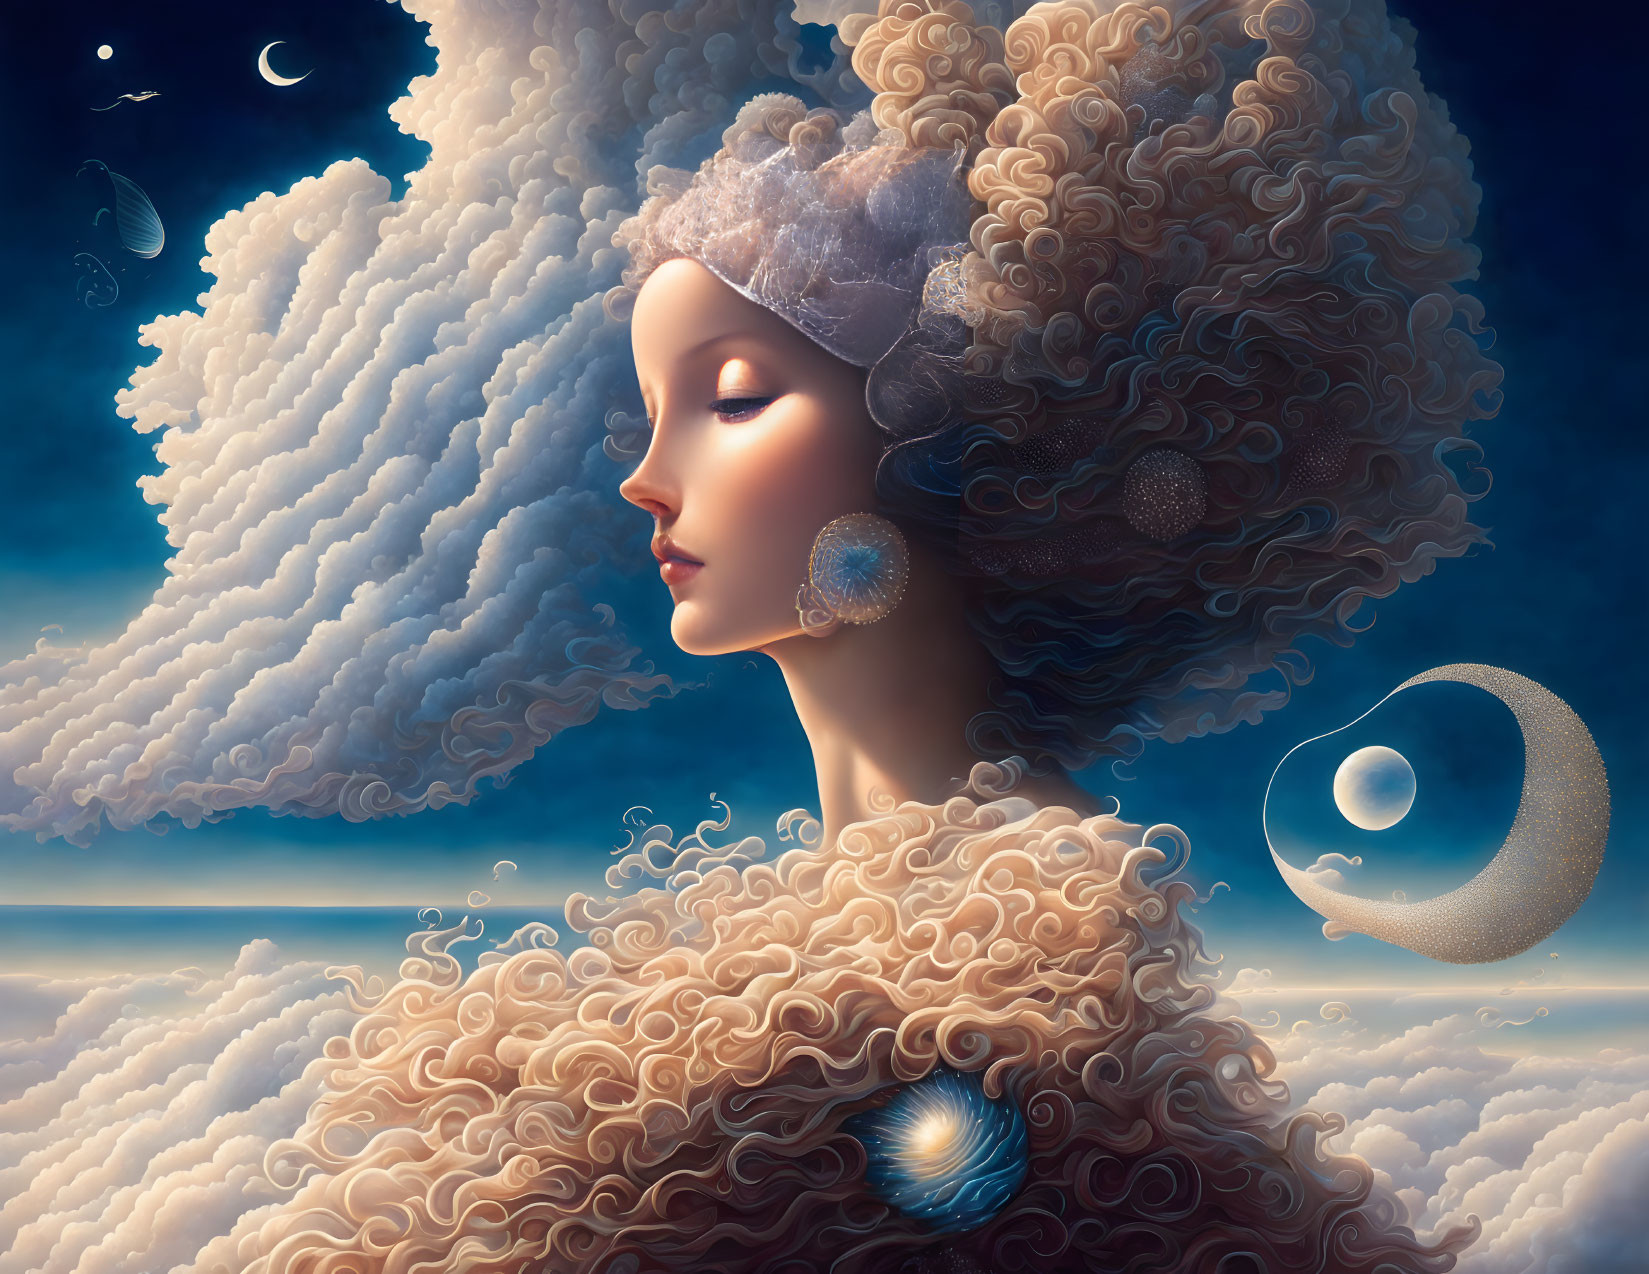 Portrait of woman with voluminous curly hair blending with clouds and celestial bodies against night sky.